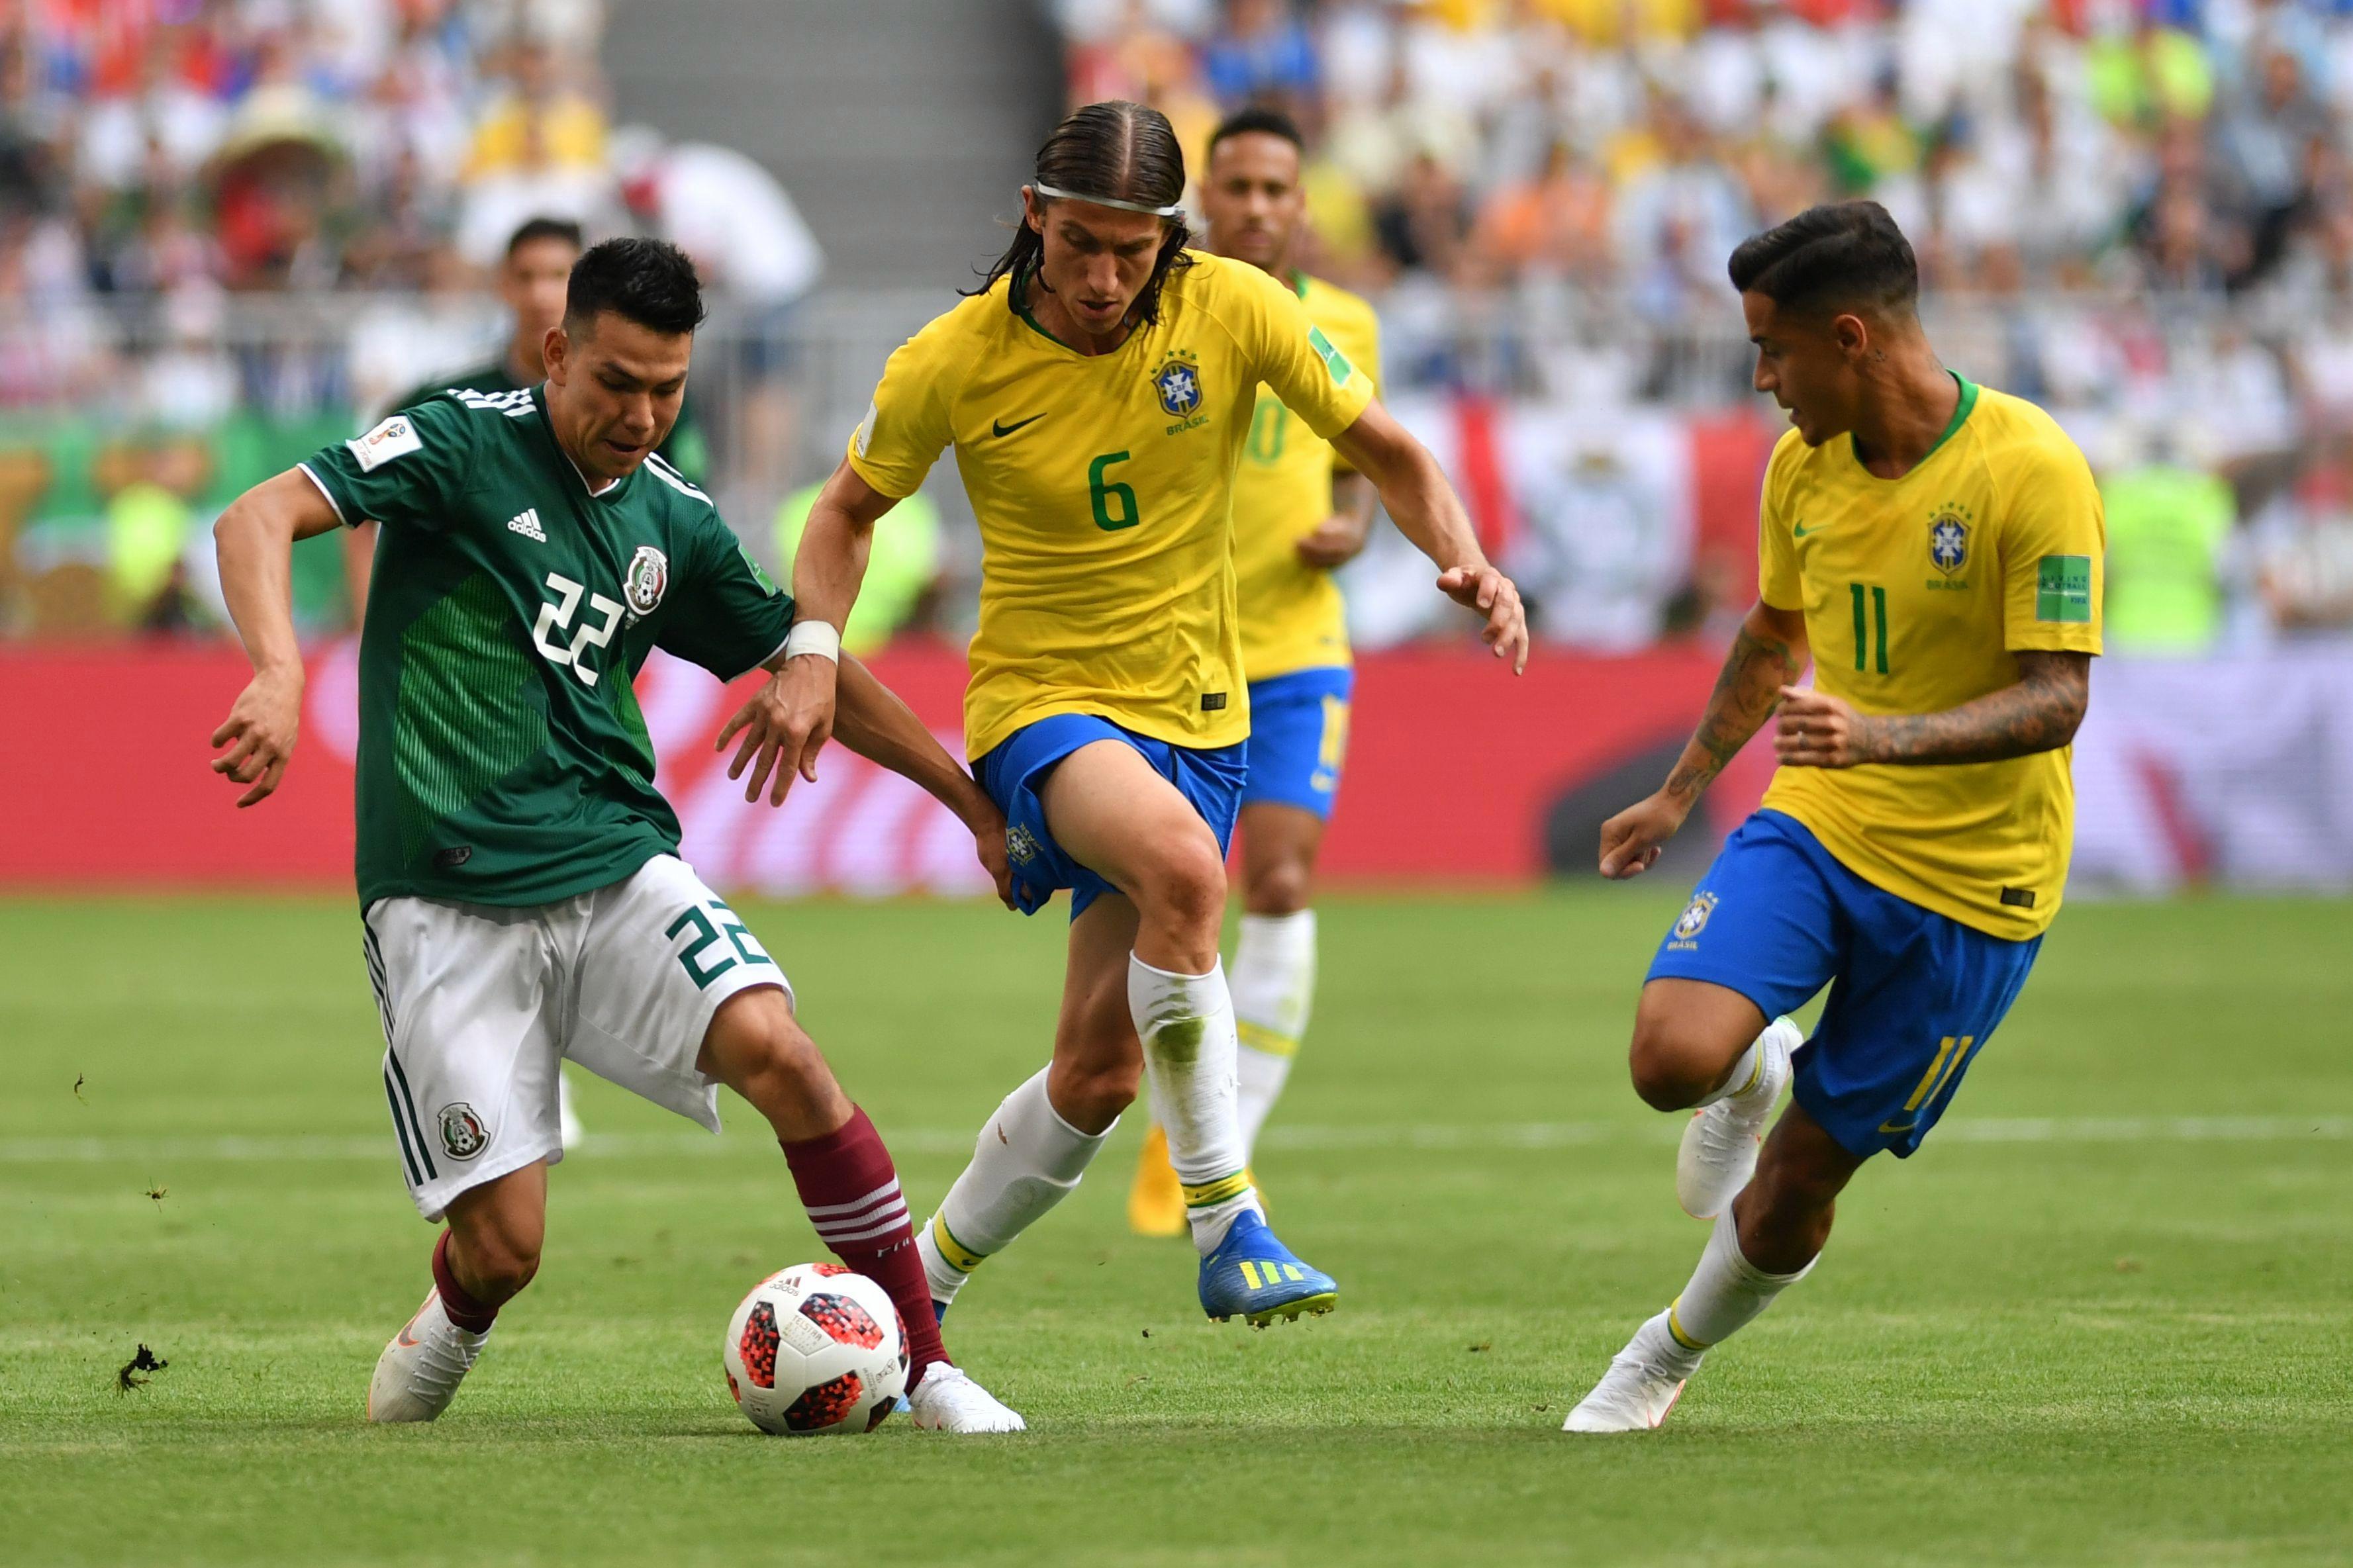 'Forget Willian, we need Hirving Lozano' - Manchester United fans beg club to sign Mexico World Cup star